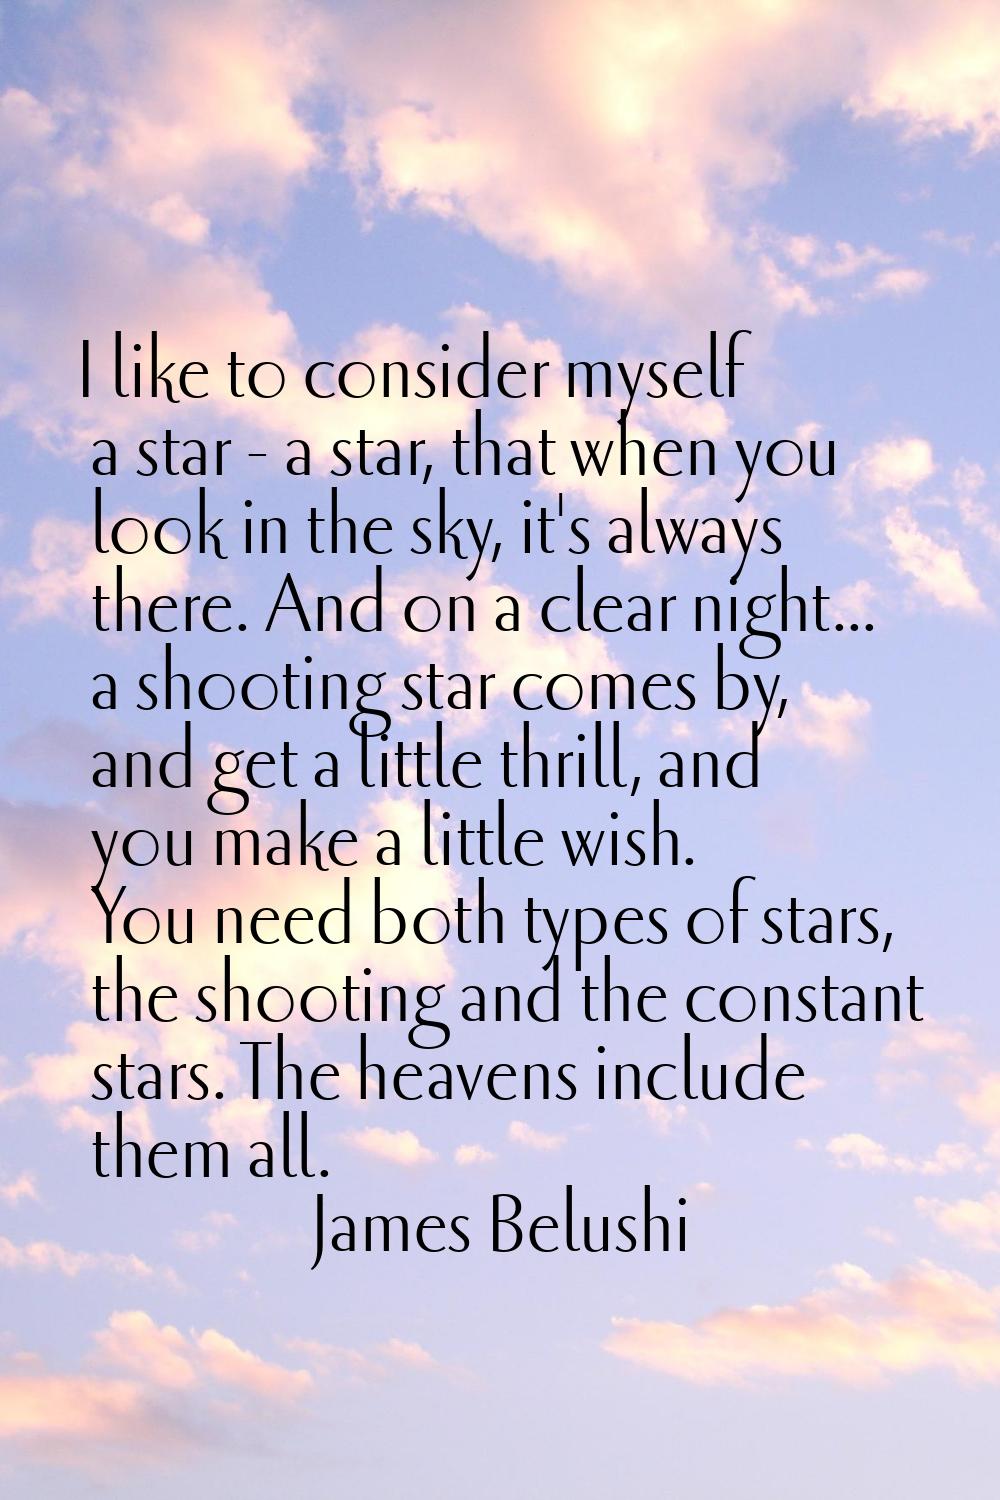 I like to consider myself a star - a star, that when you look in the sky, it's always there. And on